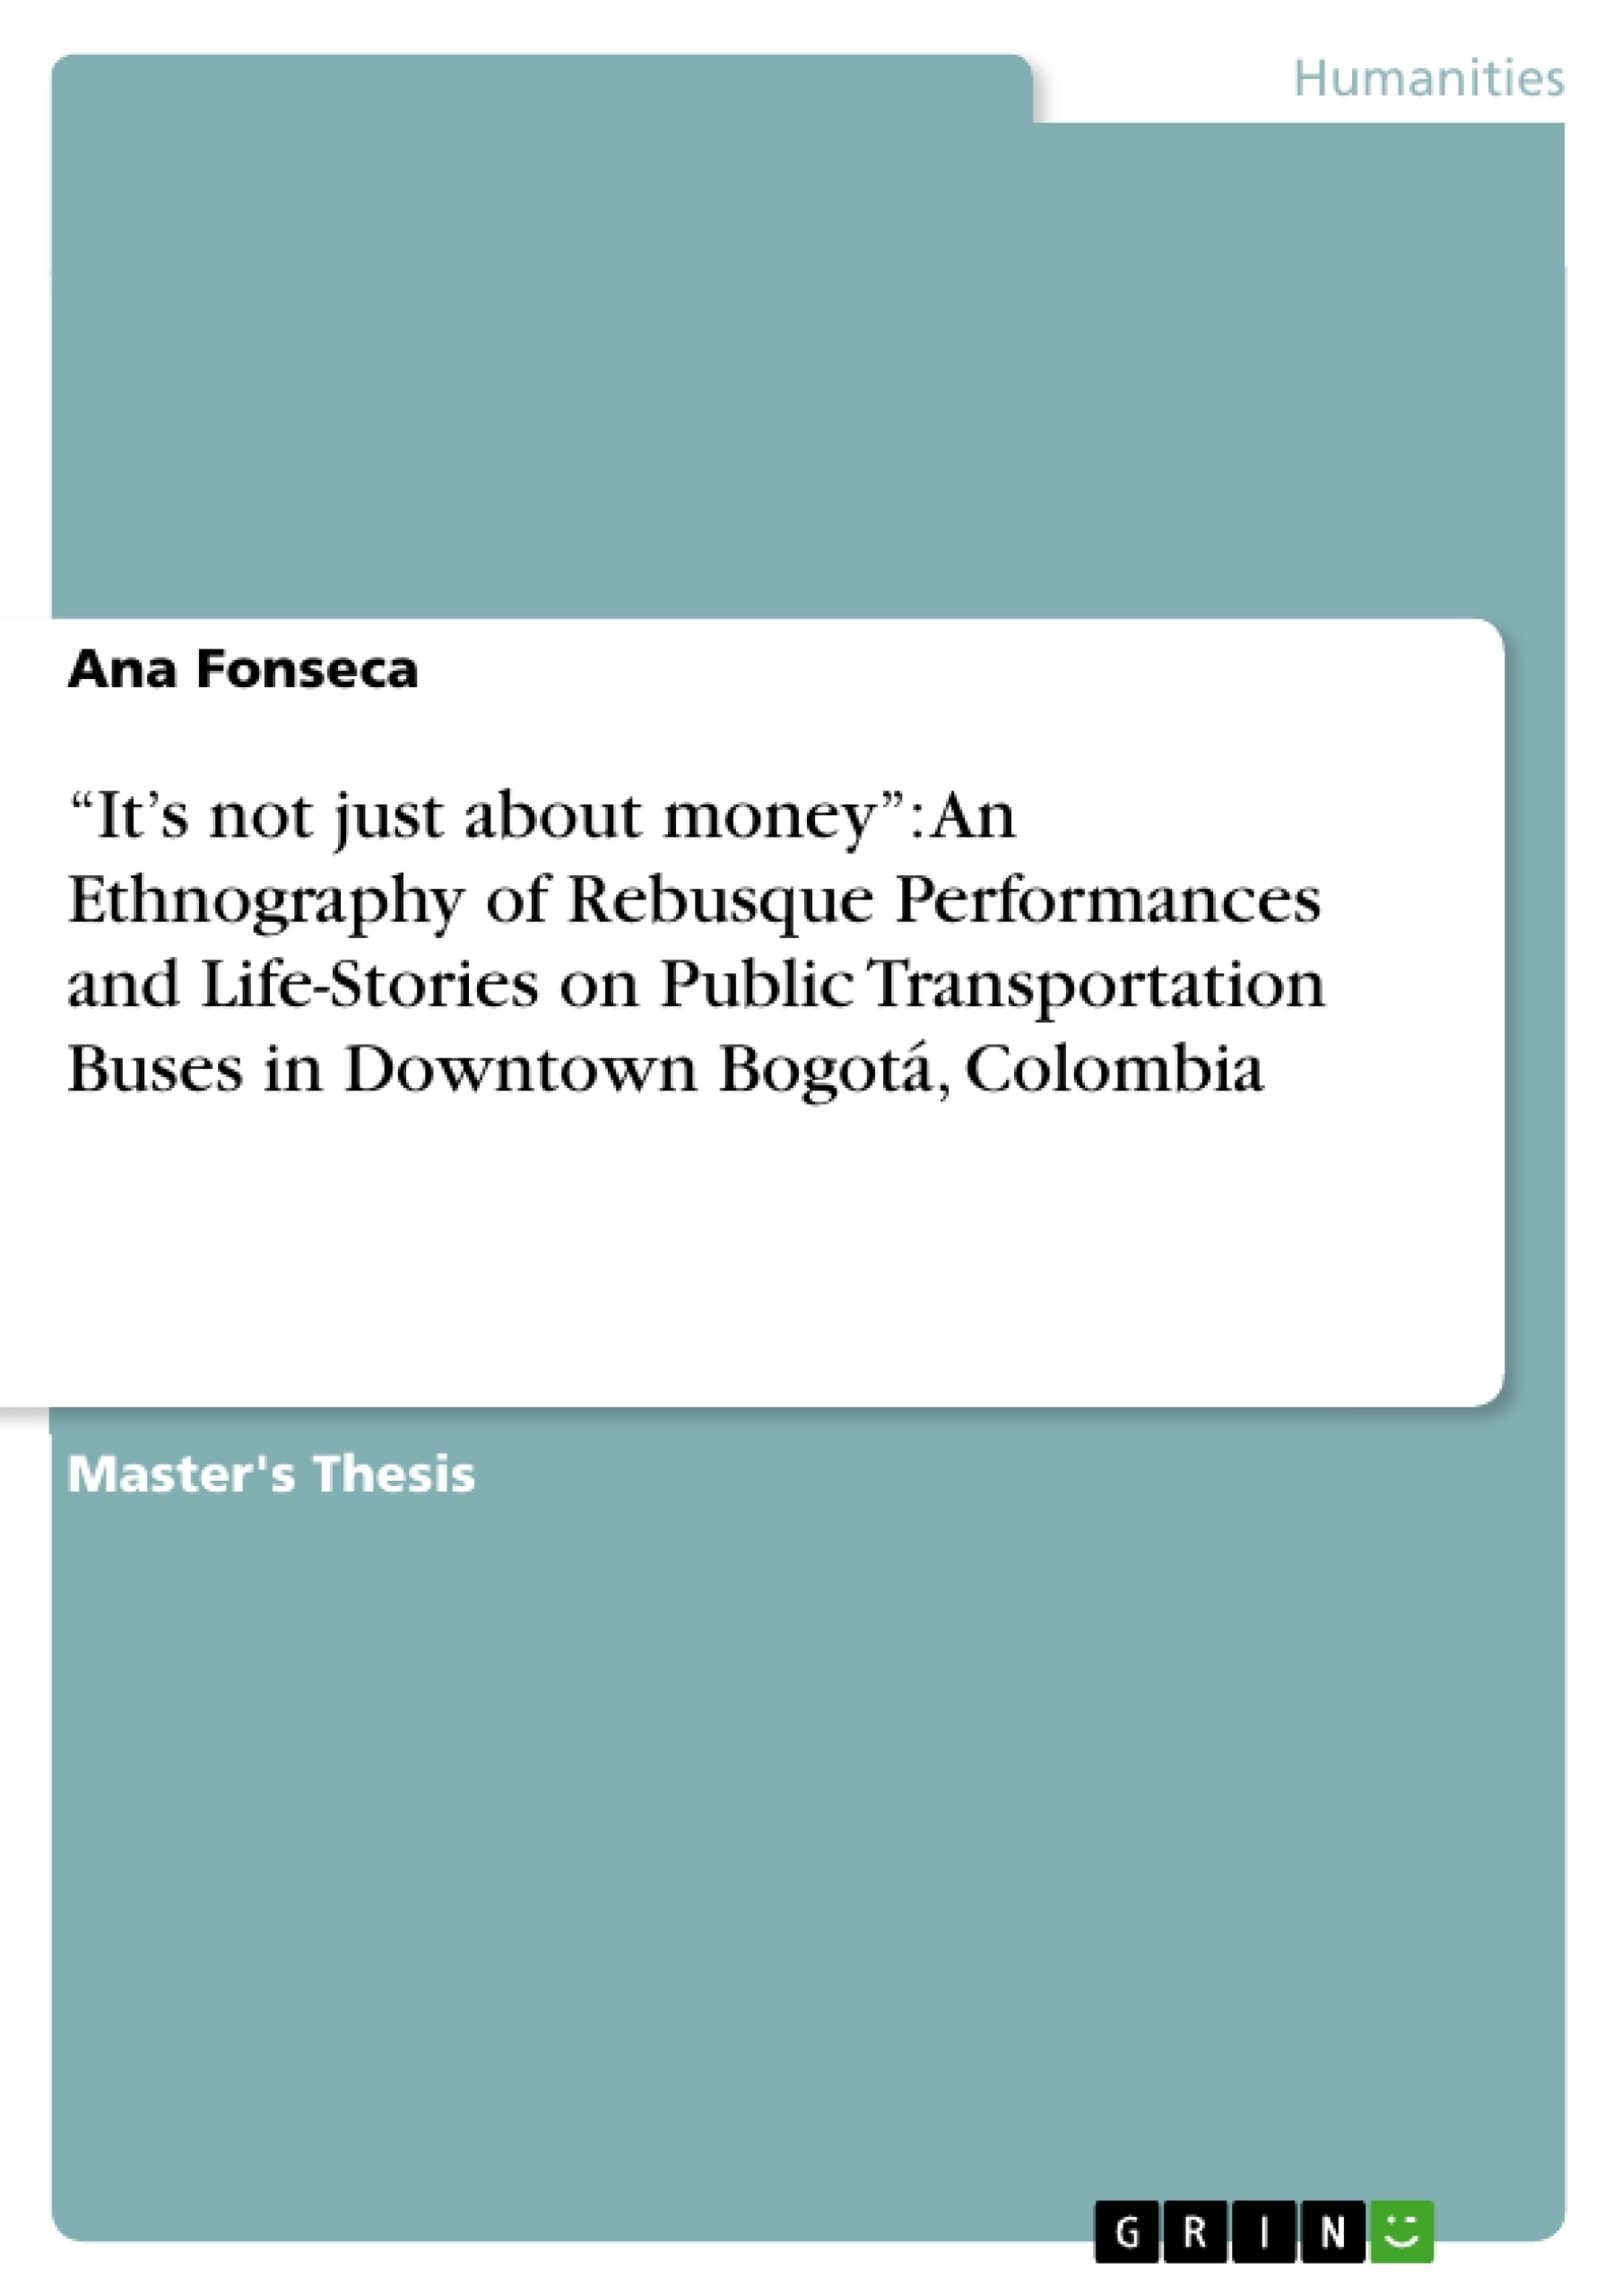 Titre: “It’s not just about money”: An Ethnography of Rebusque Performances and Life-Stories on Public Transportation Buses in Downtown Bogotá, Colombia